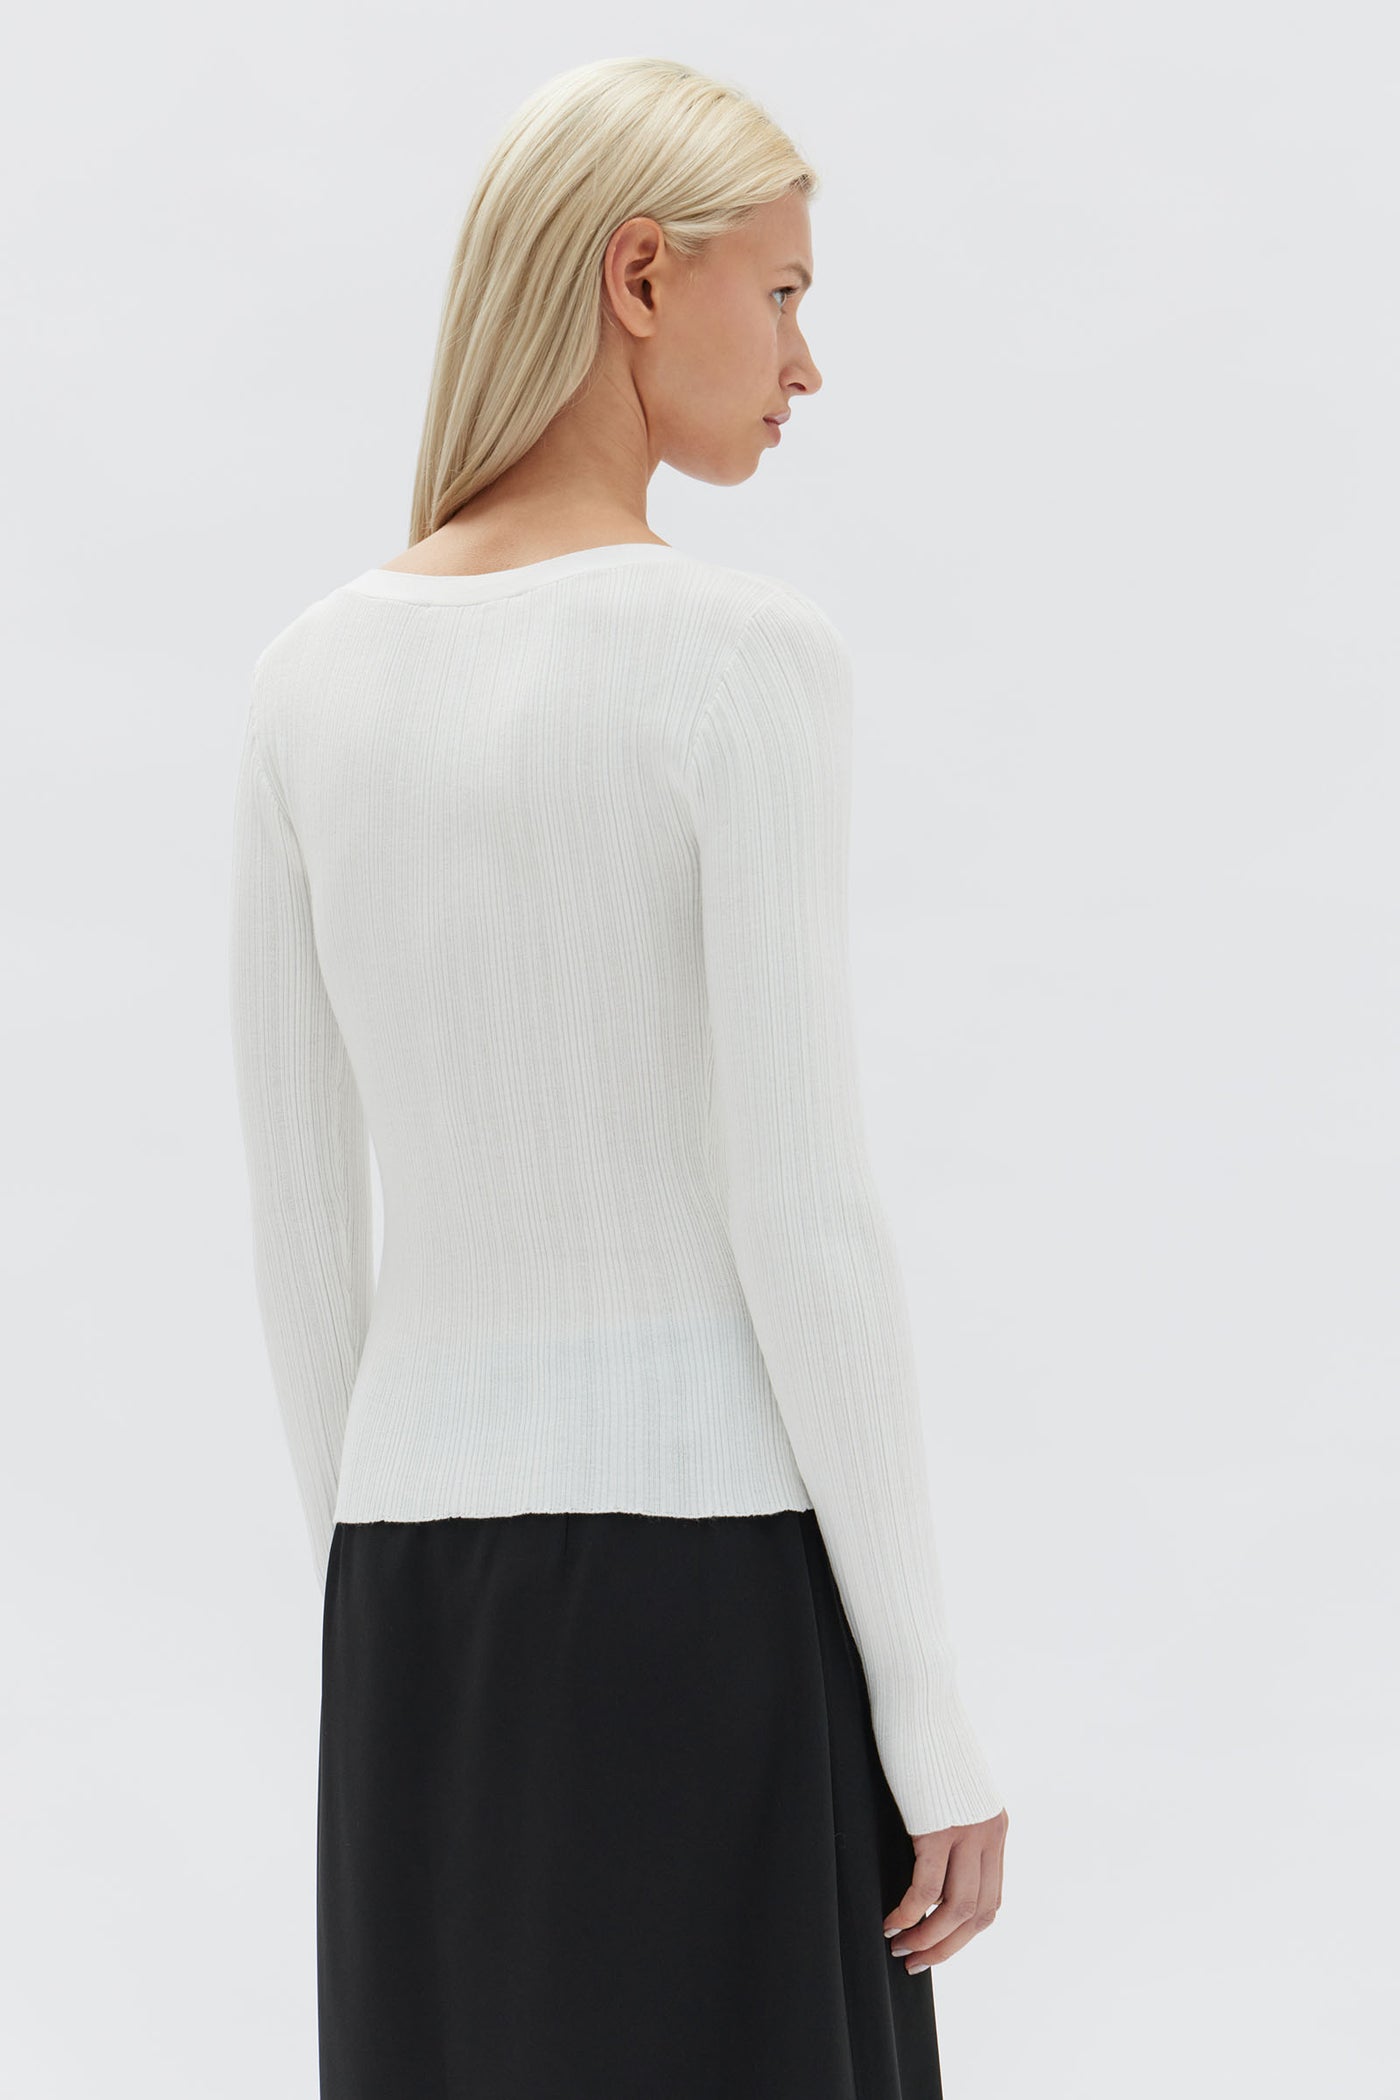 Assembly Label Vienna Knit Long Sleeve Top